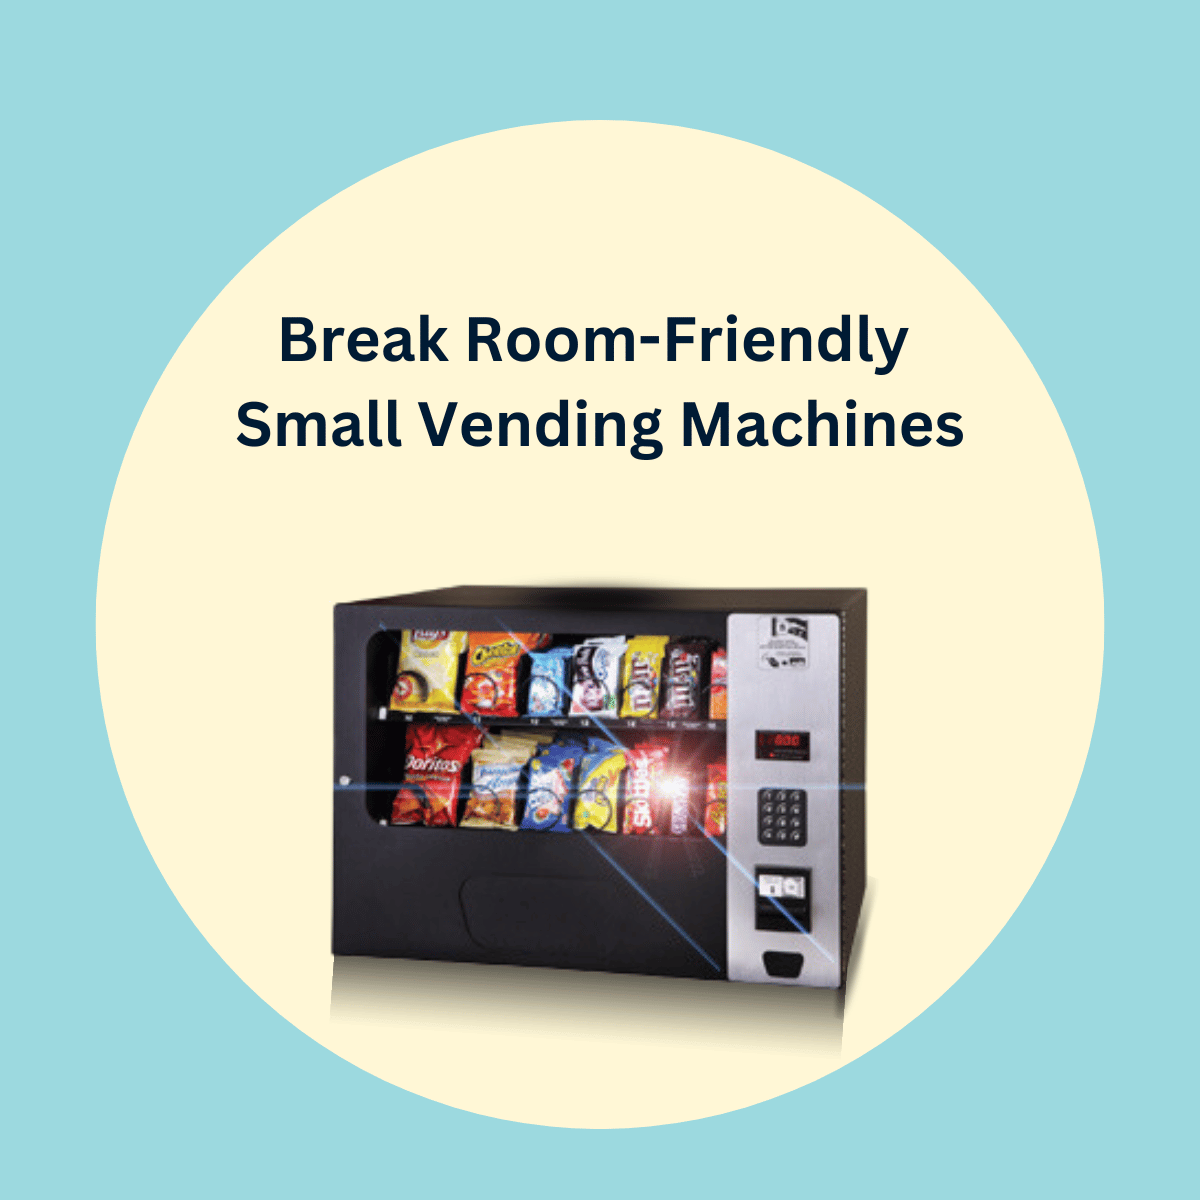 SMALL VENDING MACHINES ARE PERFECT FOR BREAK ROOMS